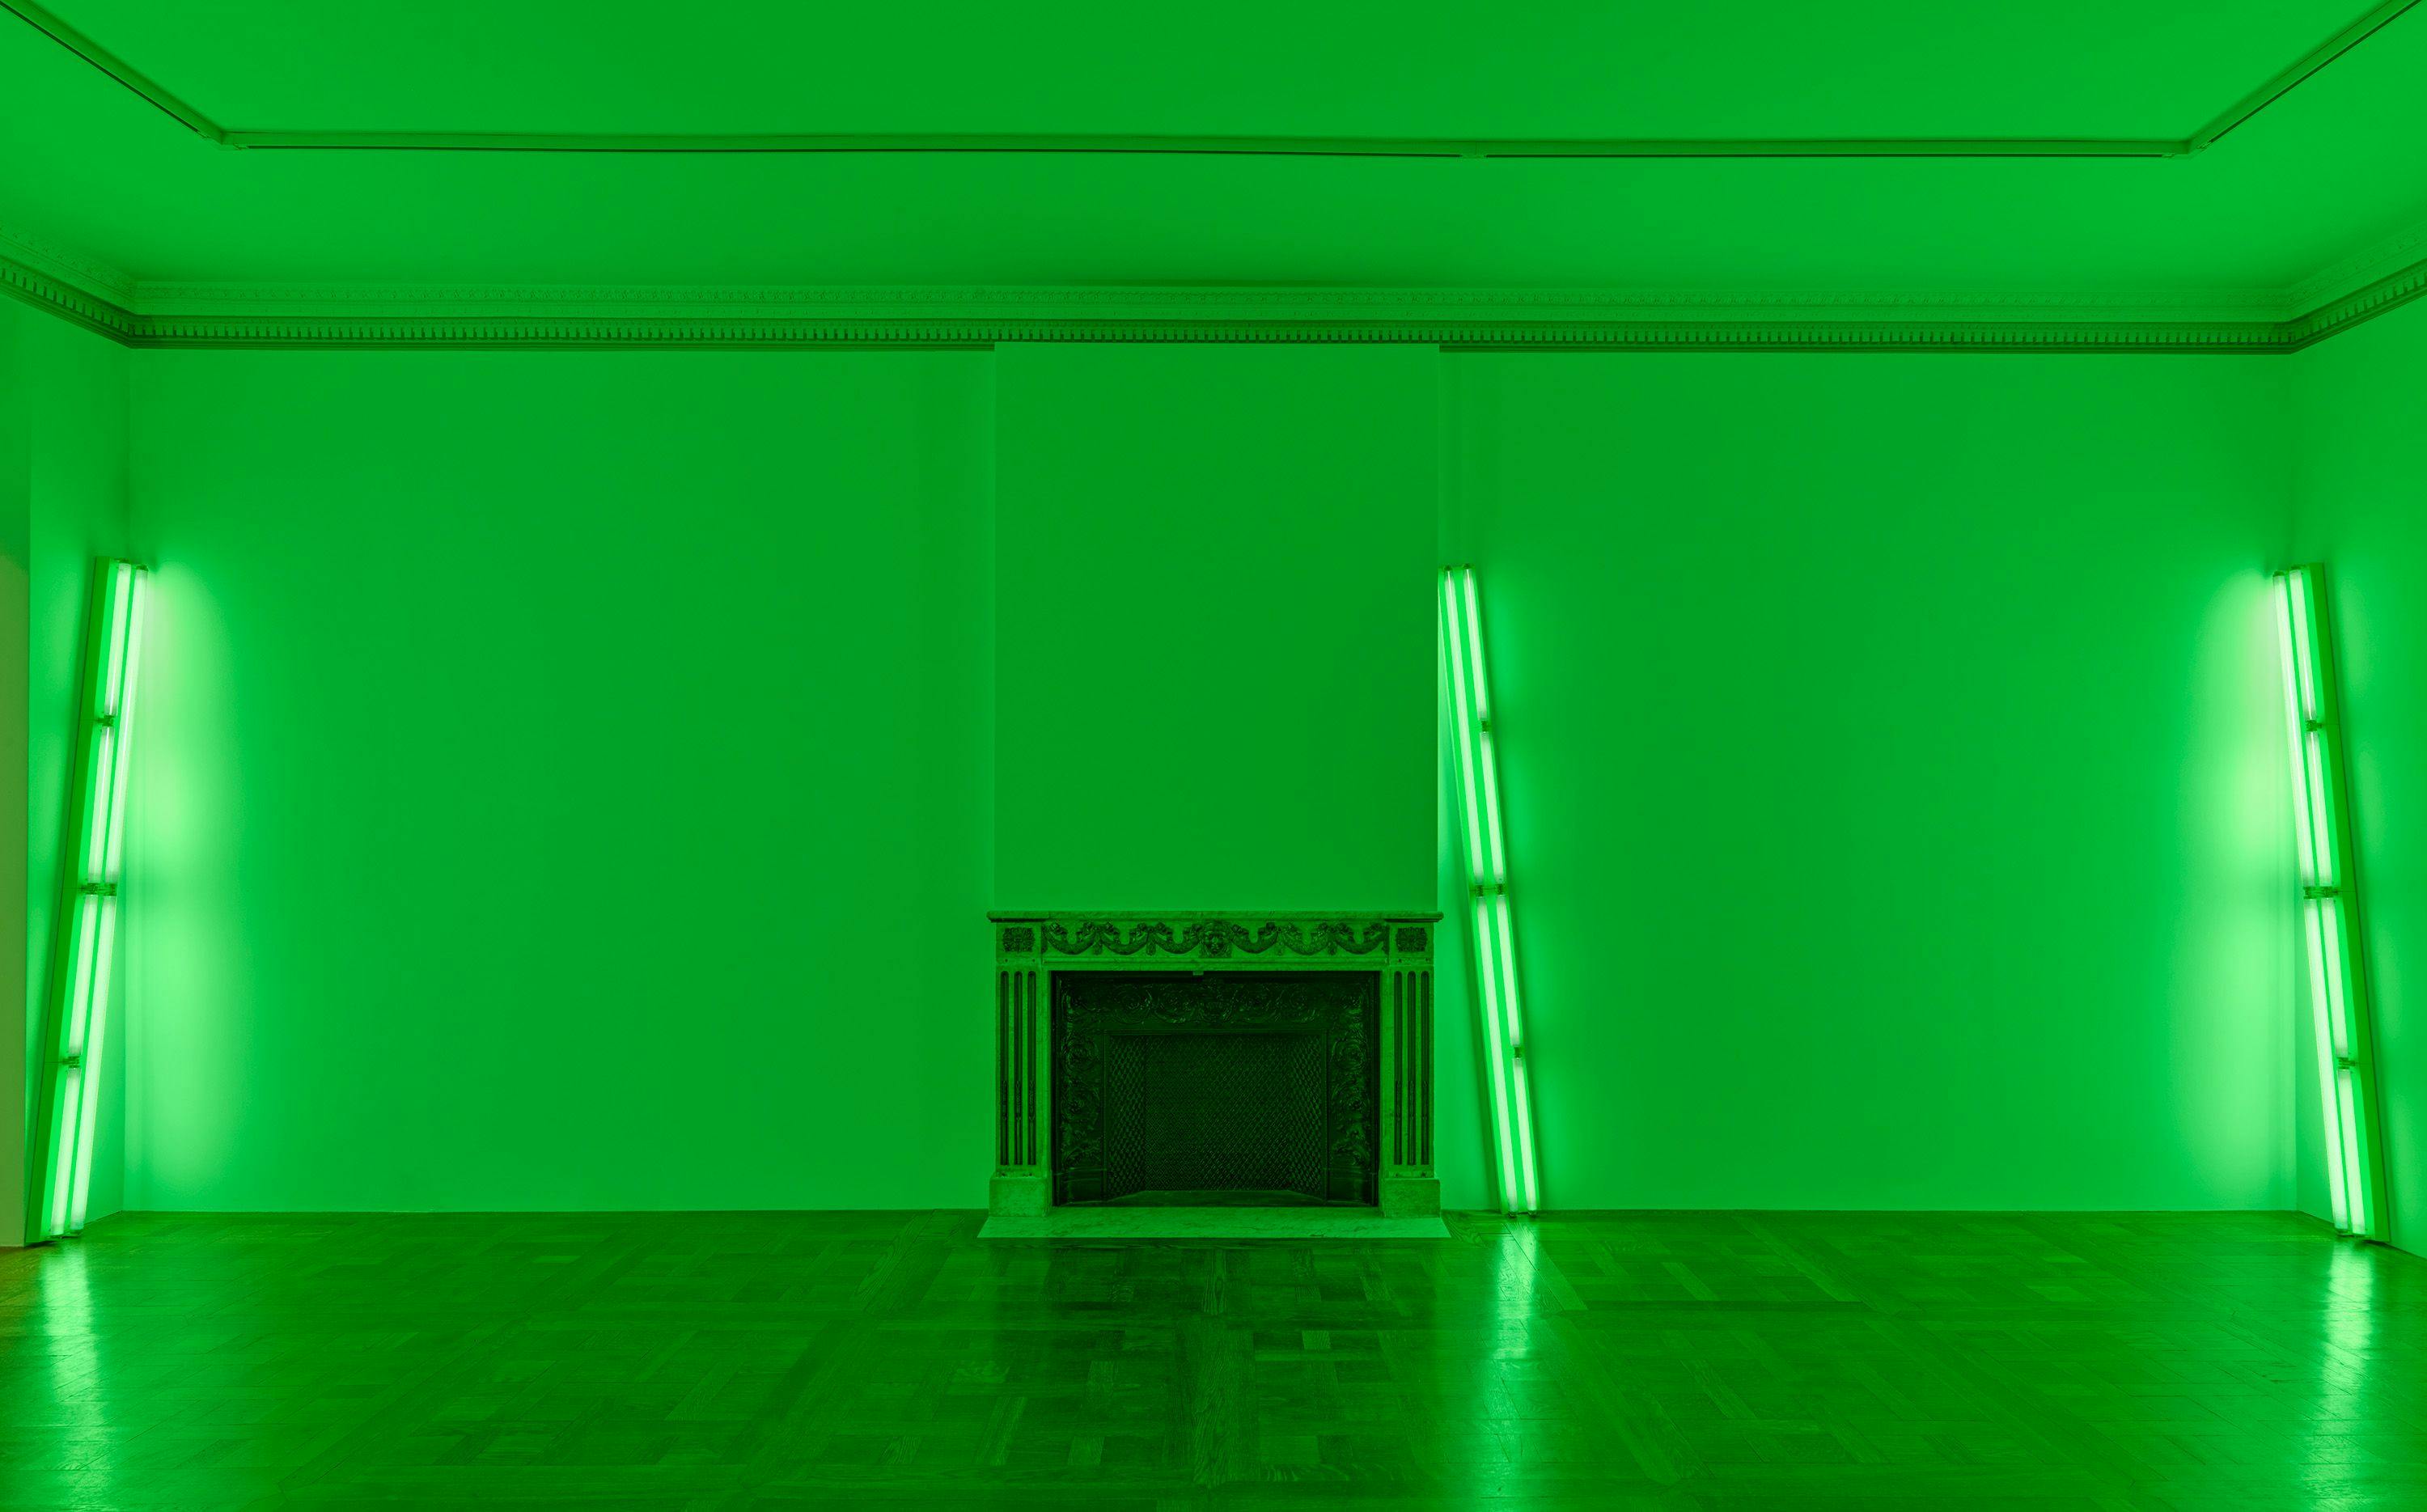 Installation view of an exhibition titled, Dan Flavin: Kornblee Gallery 1967, at David Zwirner in New York, dated 2023.